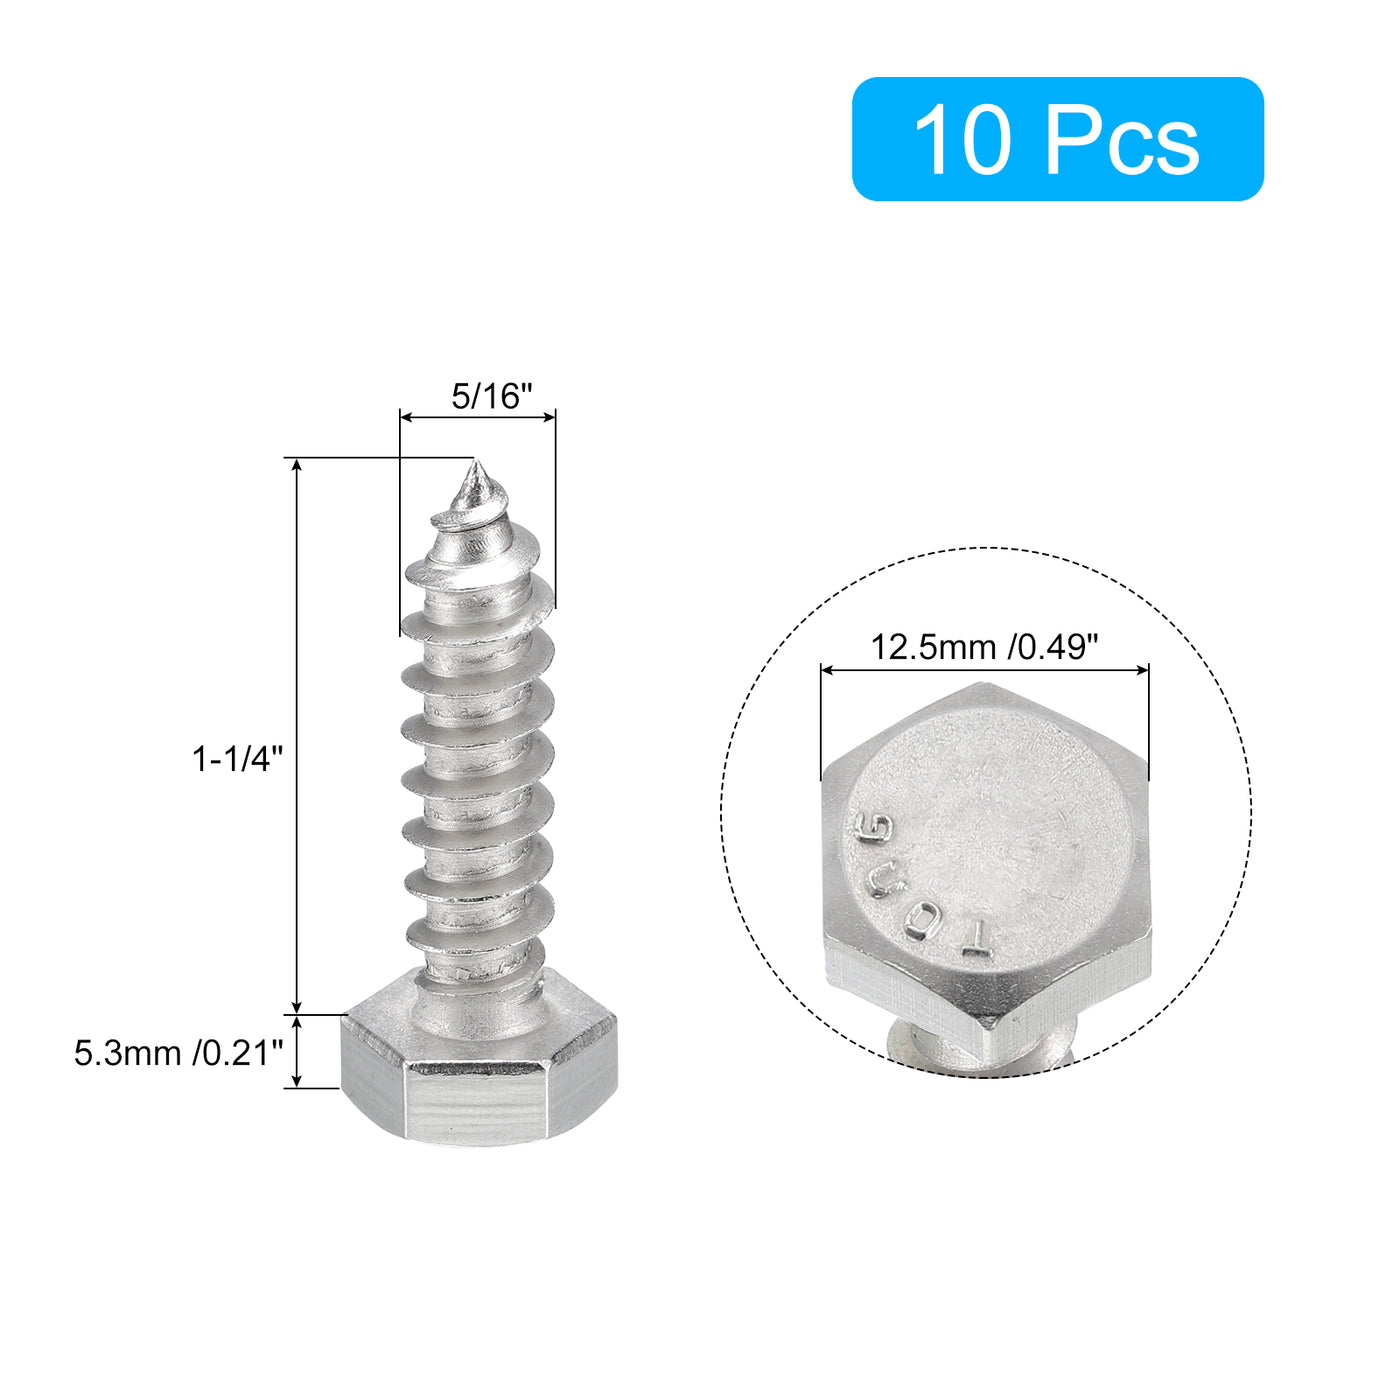 uxcell Uxcell Hex Head Lag Screws Bolts, 10pcs 5/16" x 1-1/4" 304 Stainless Steel Wood Screws